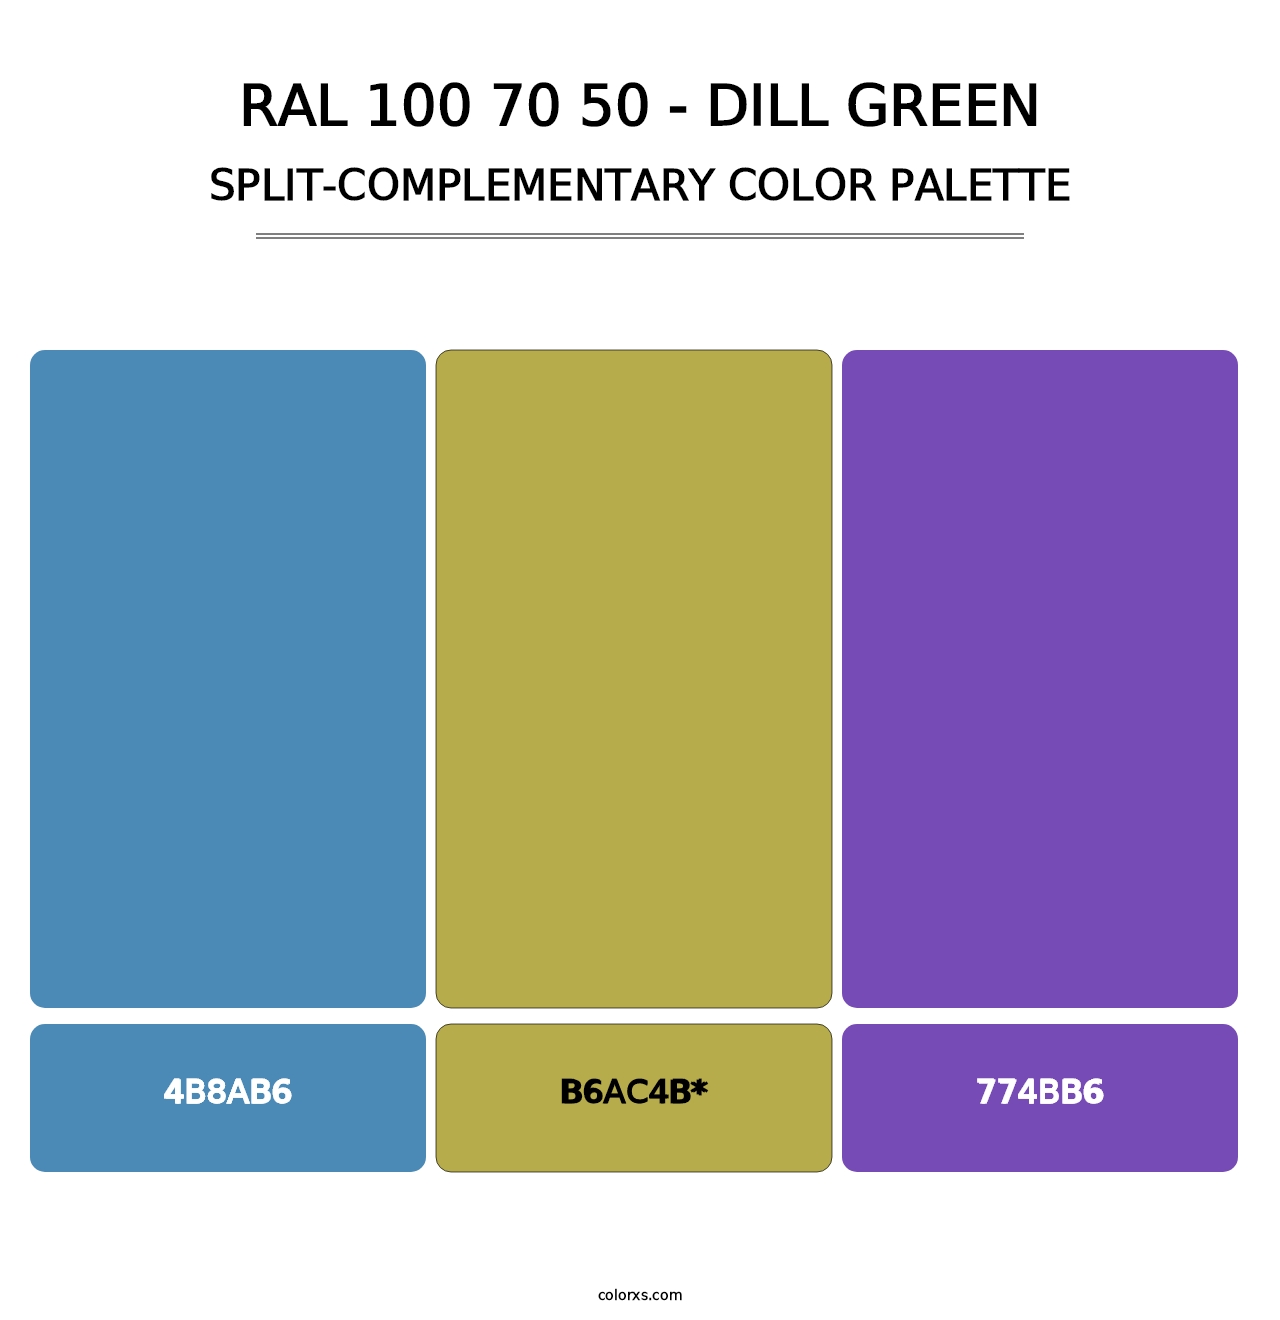 RAL 100 70 50 - Dill Green - Split-Complementary Color Palette